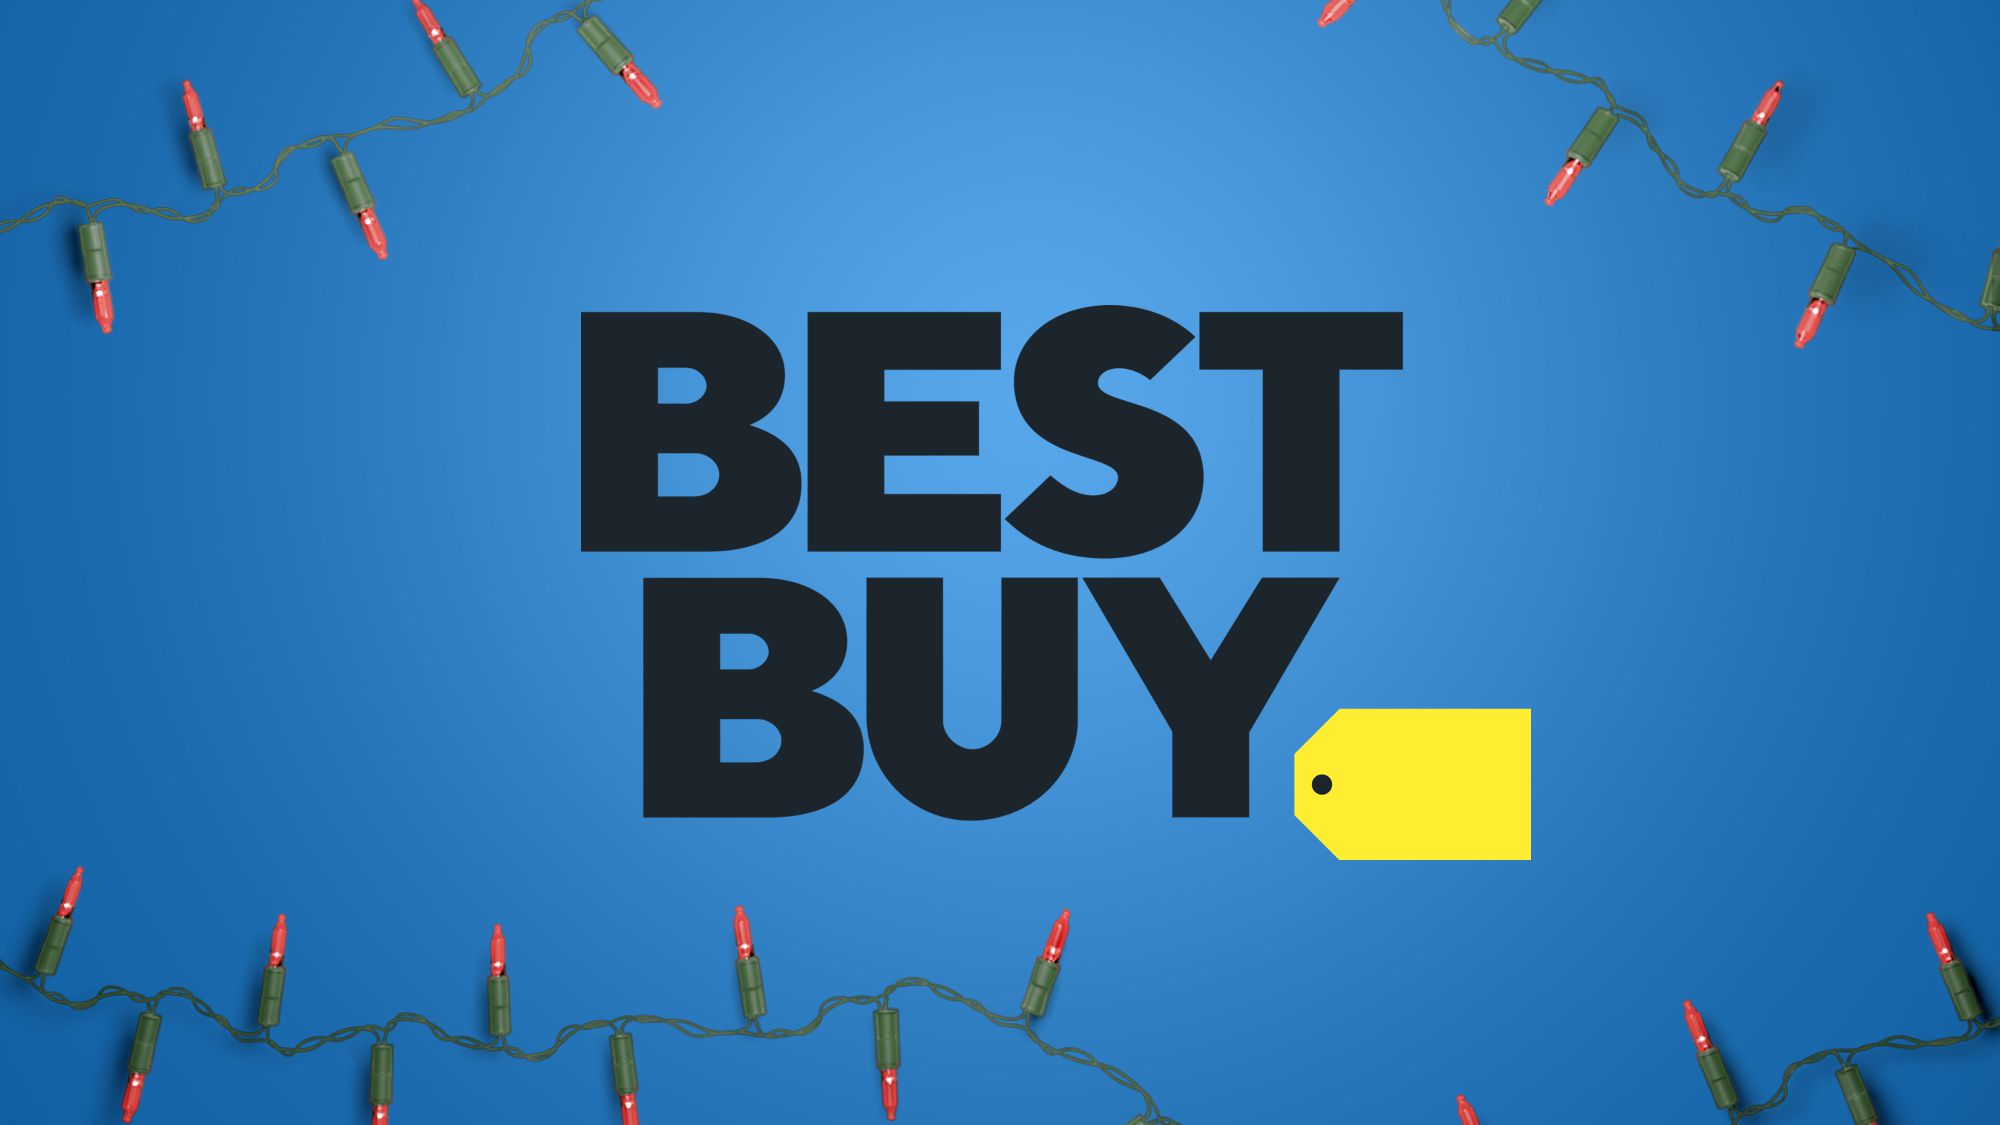 Best Buy Reveals Black Friday Plans With Sitewide Sales Available Now